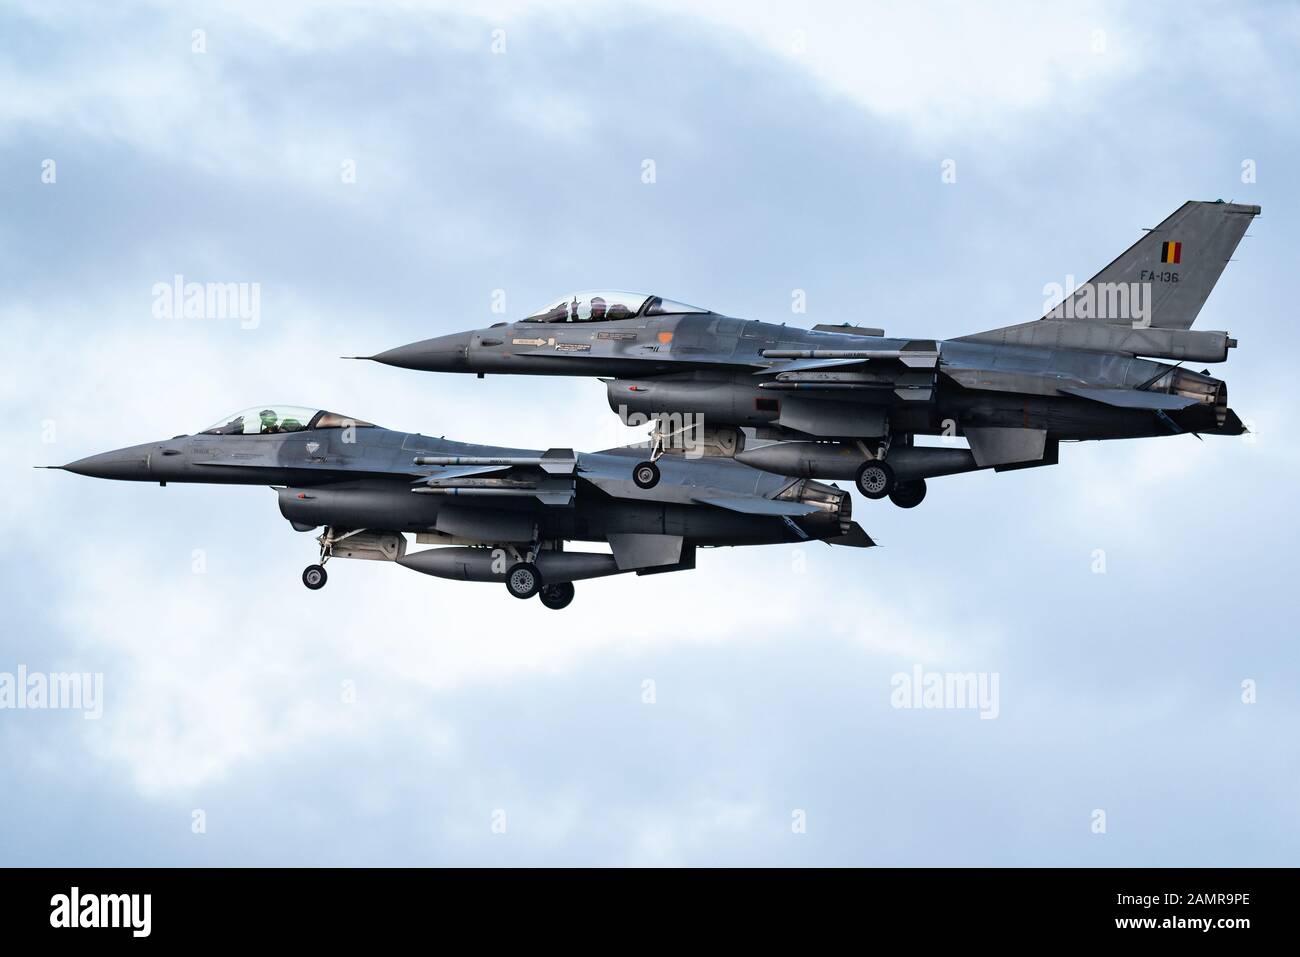 A General Dynamics F-16 Fighting Falcon fighter jet of the Belgian Air Force. Stock Photo